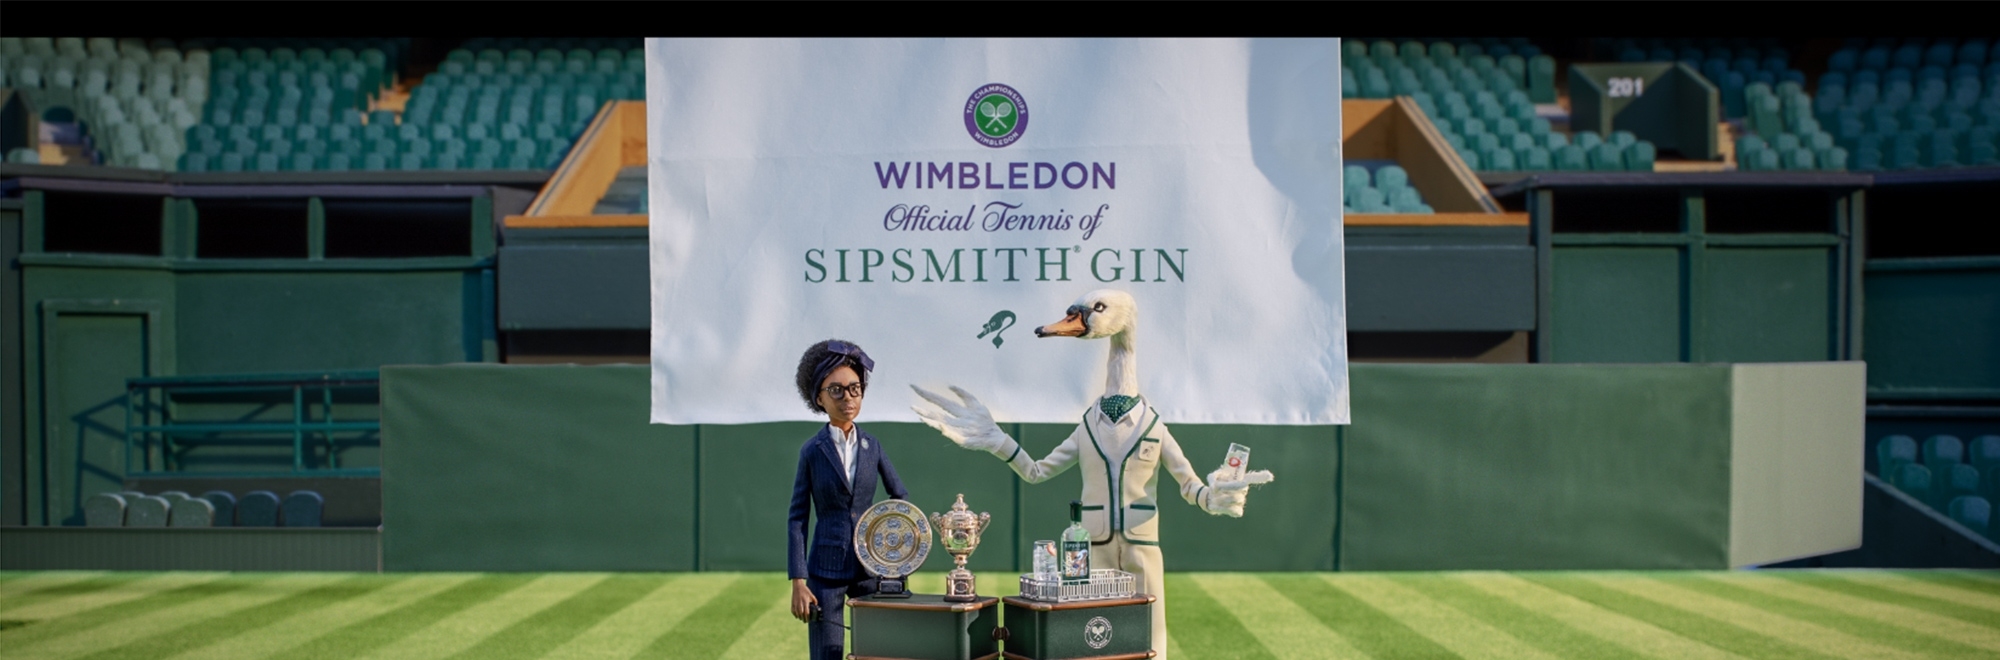 The Sipsmith swan returns in celebration of Sipsmith becoming the first official gin partner of Wimbledon